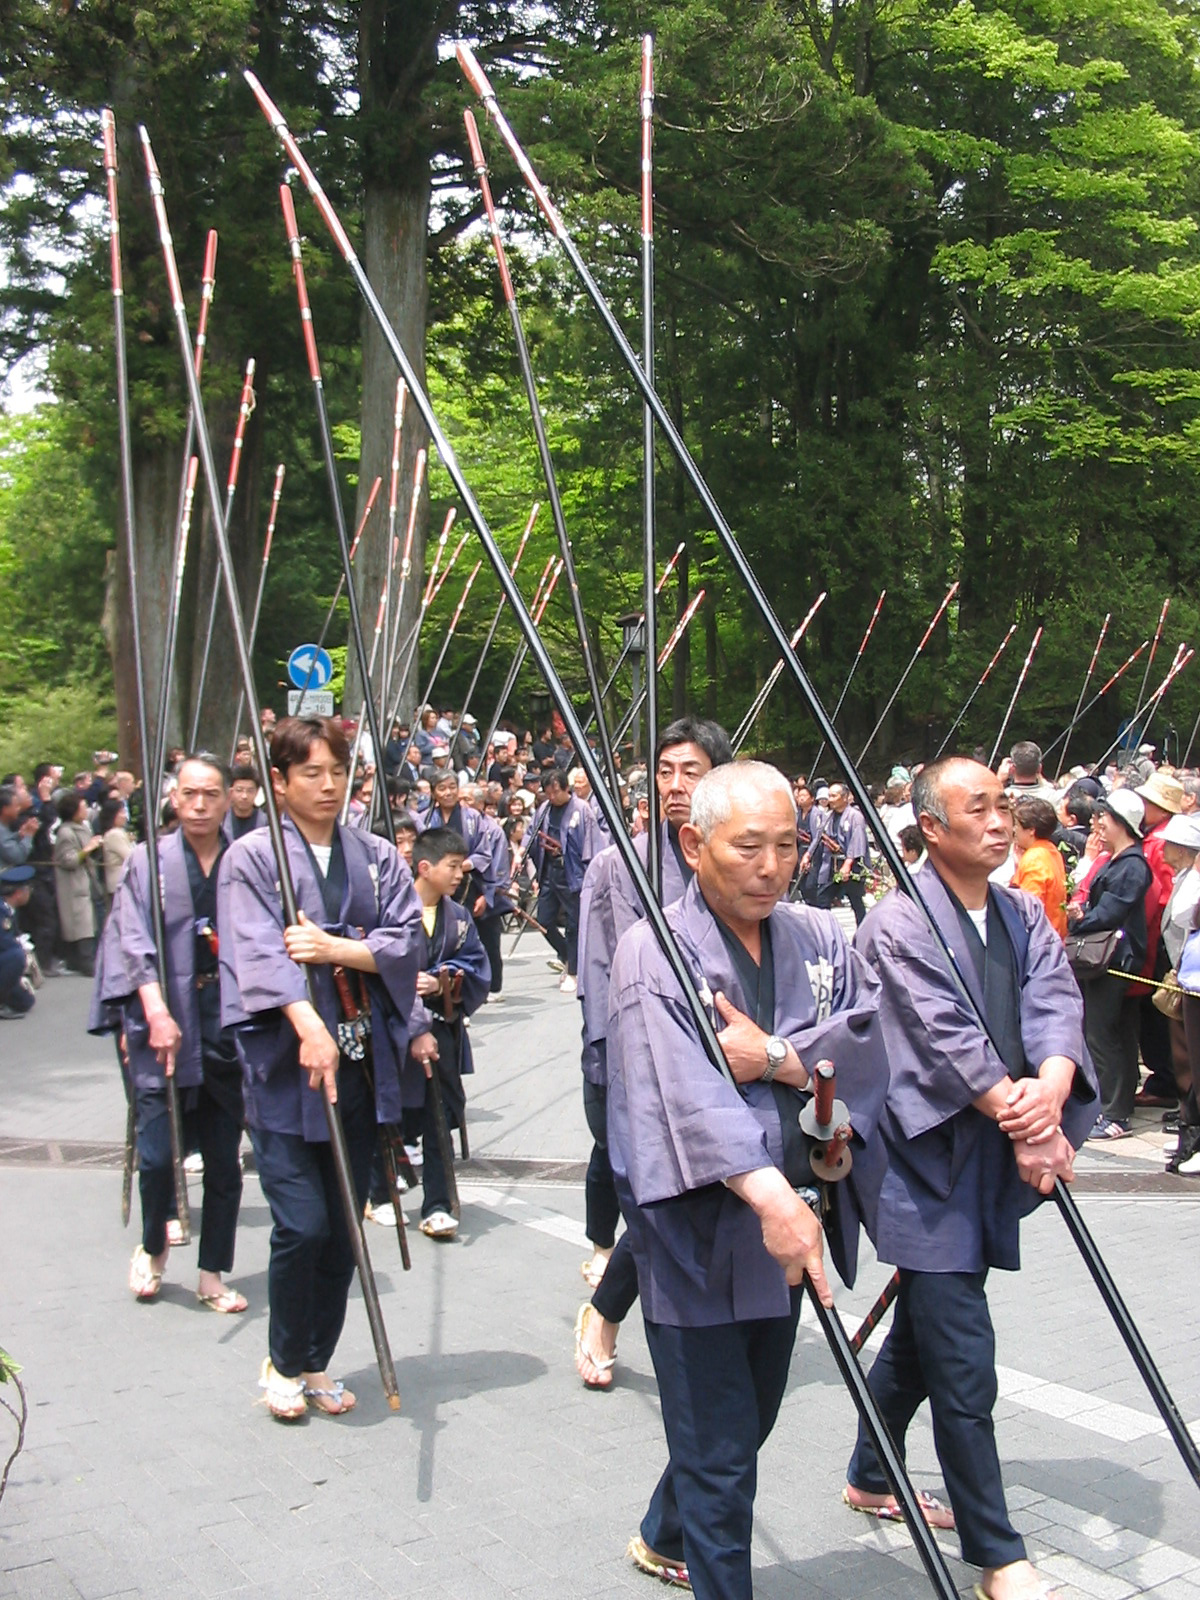 men in tradtional garb holding tall black poles